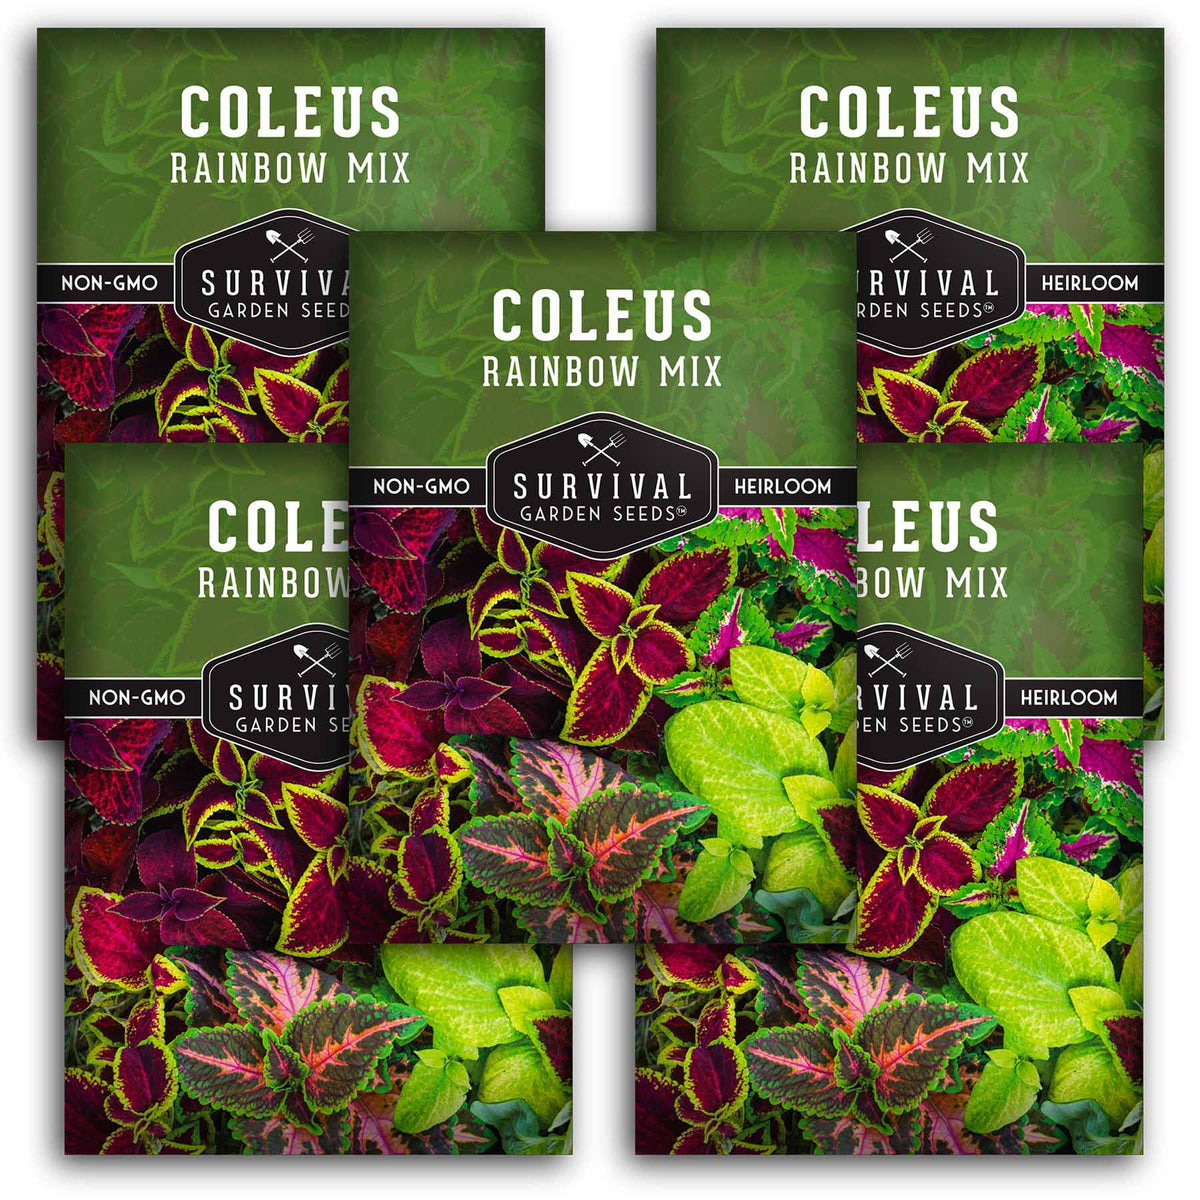 5 packets of Rainbow Mix Coleus seeds